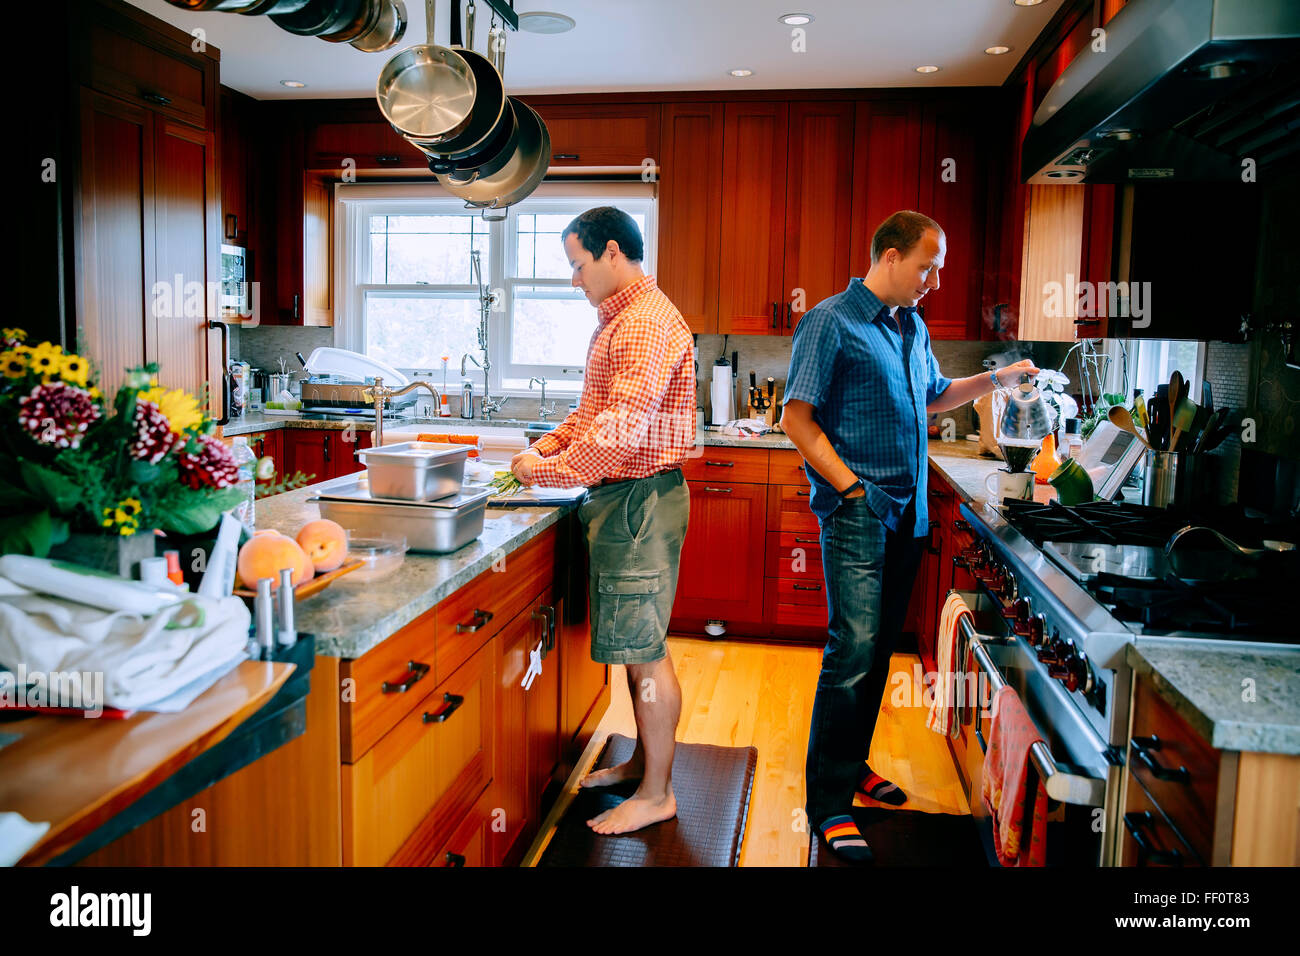 Caucasian gay couple cooking in kitchen Stock Photo